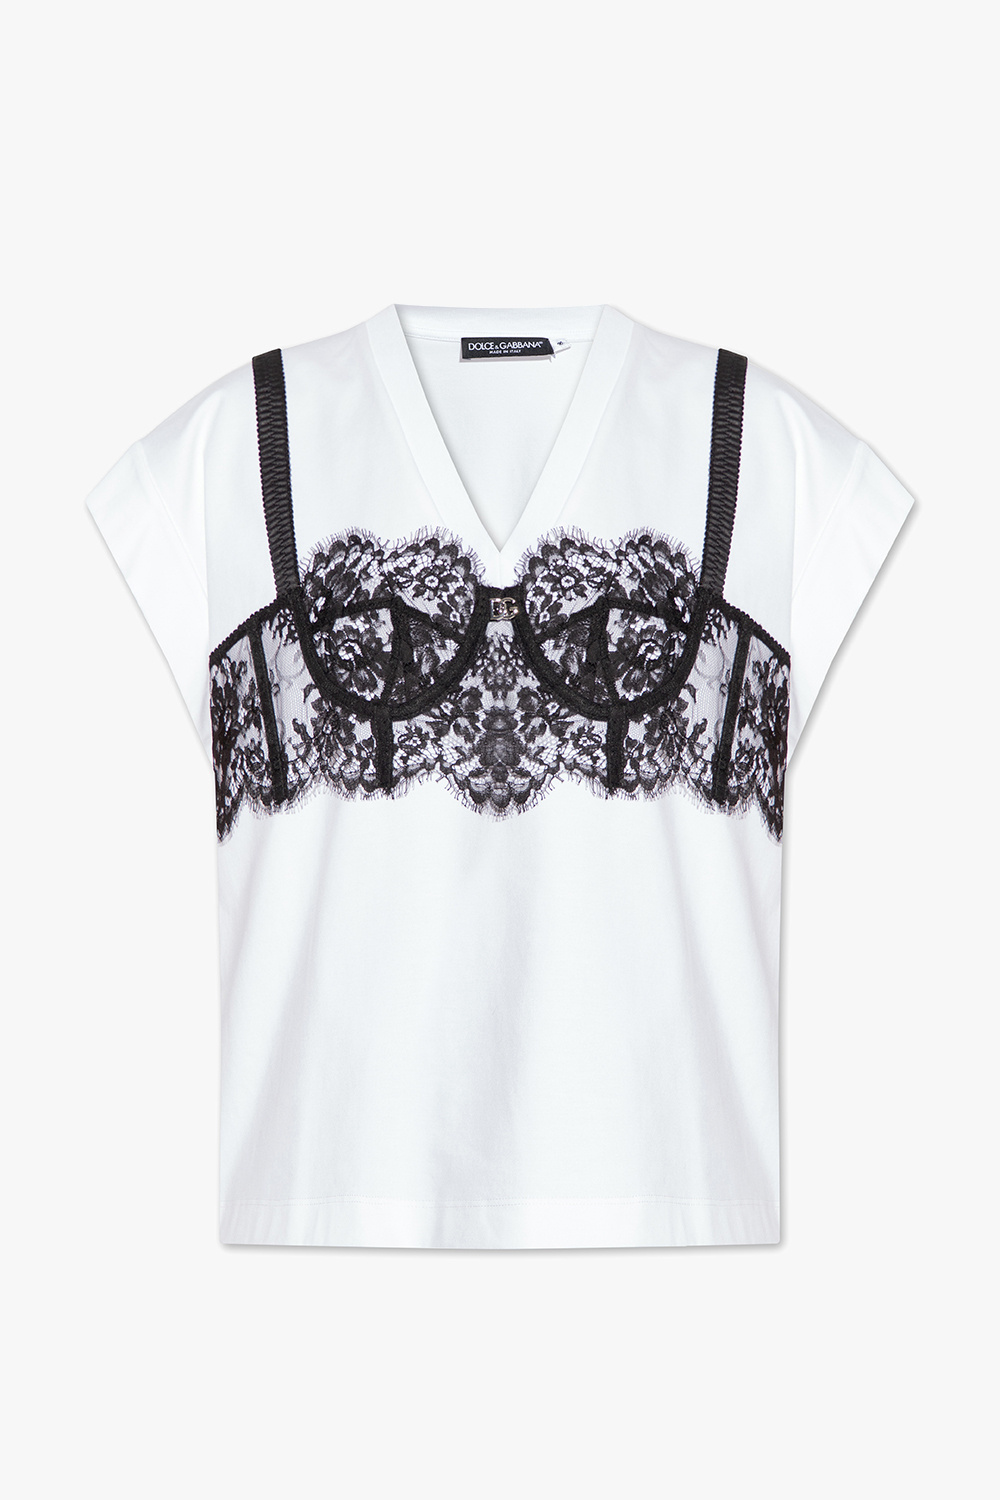 Dolce & Gabbana T-shirt with bralette details, Women's Clothing